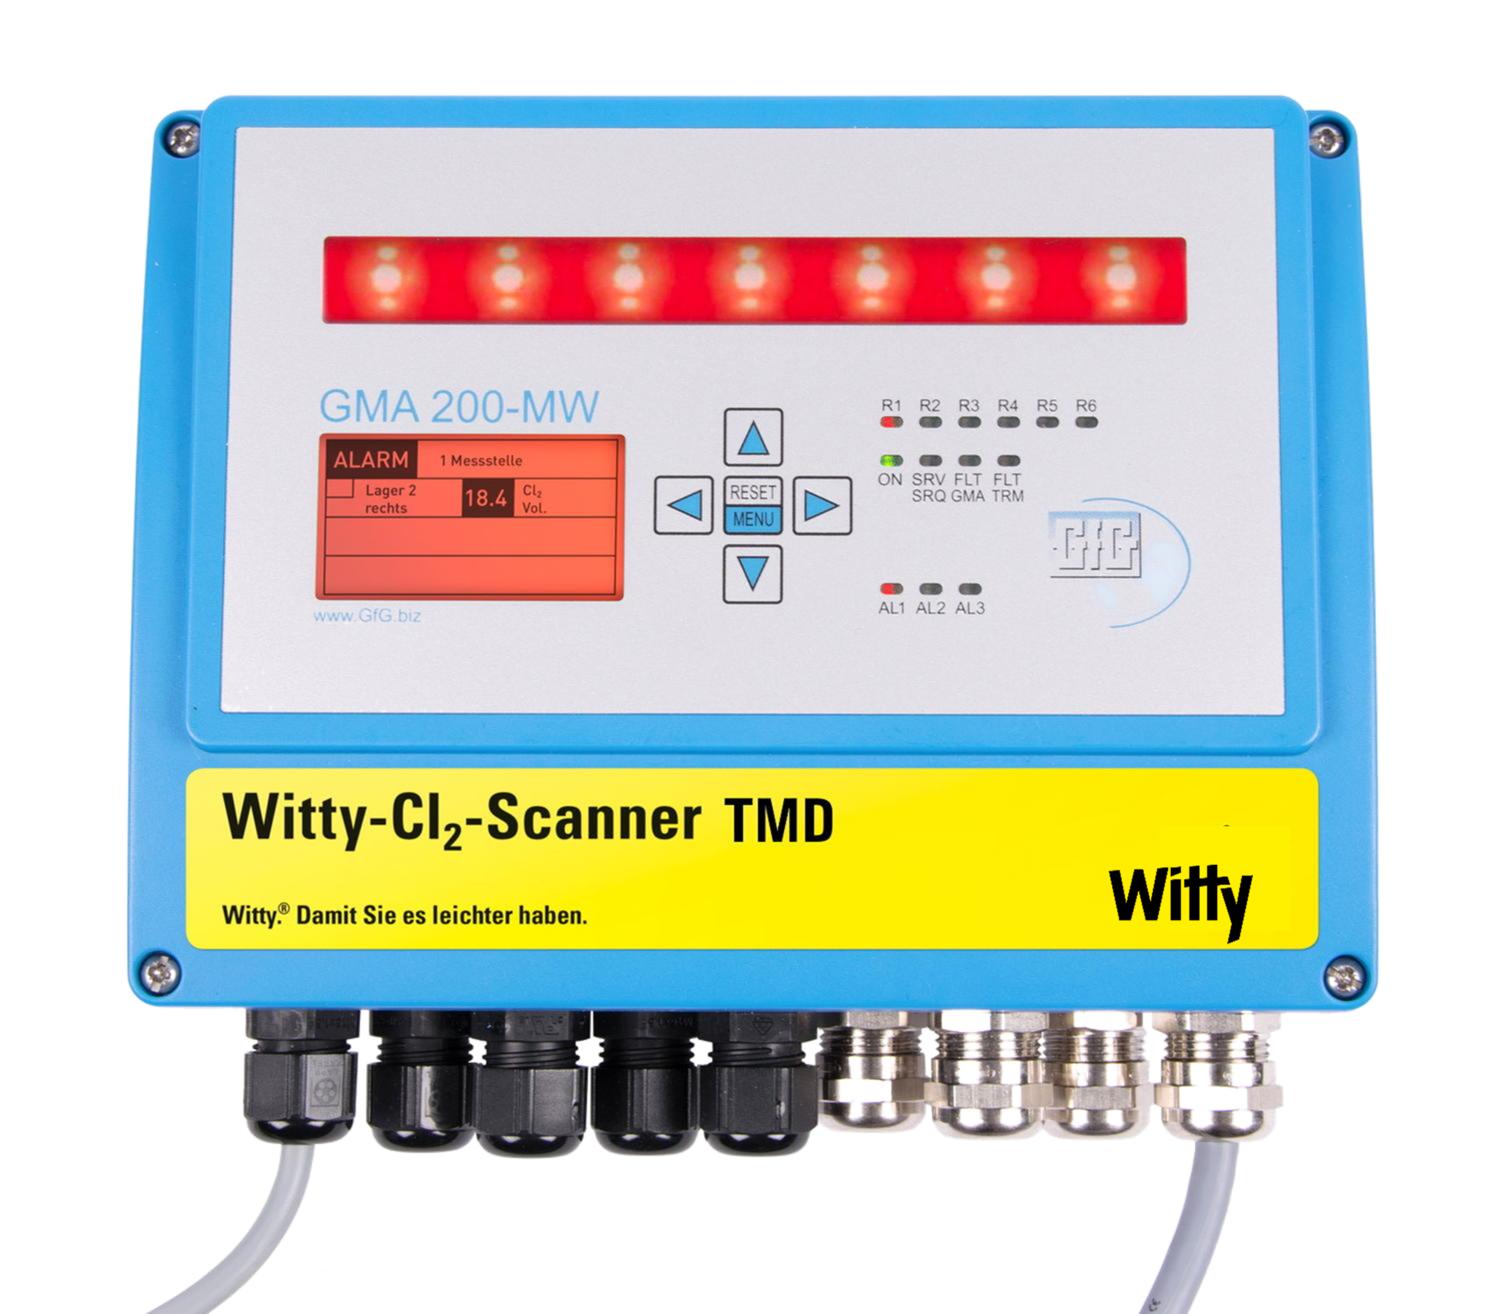 Witty-Cl2-Scanner TMD